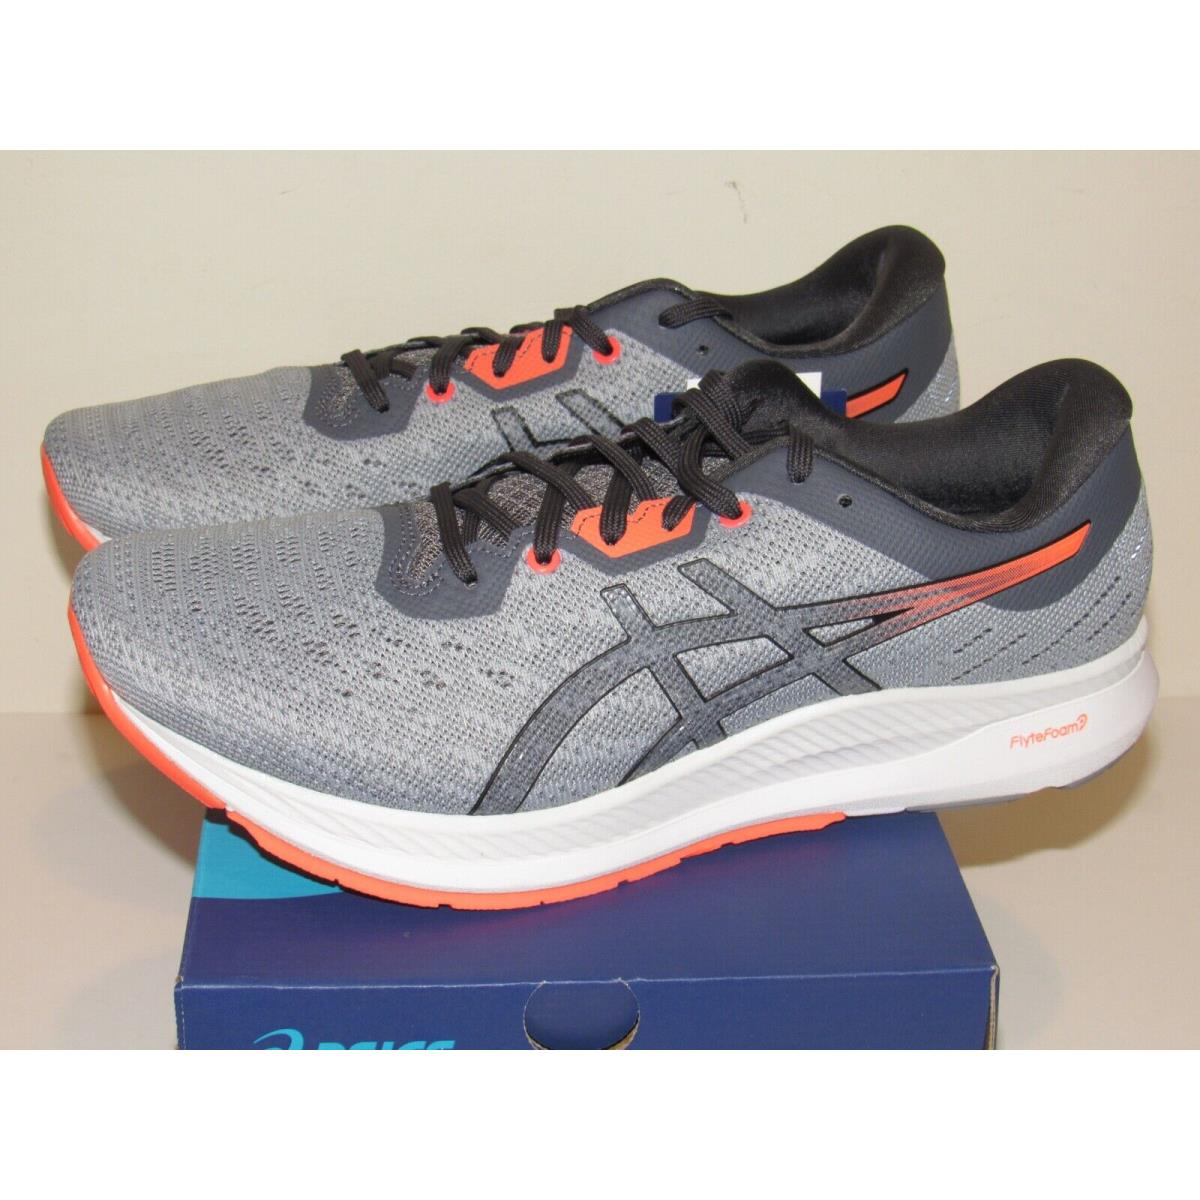 Asics Evoride Mens Size 9.5 Running Shoe Sneakers Gray Sheet Rock Coral